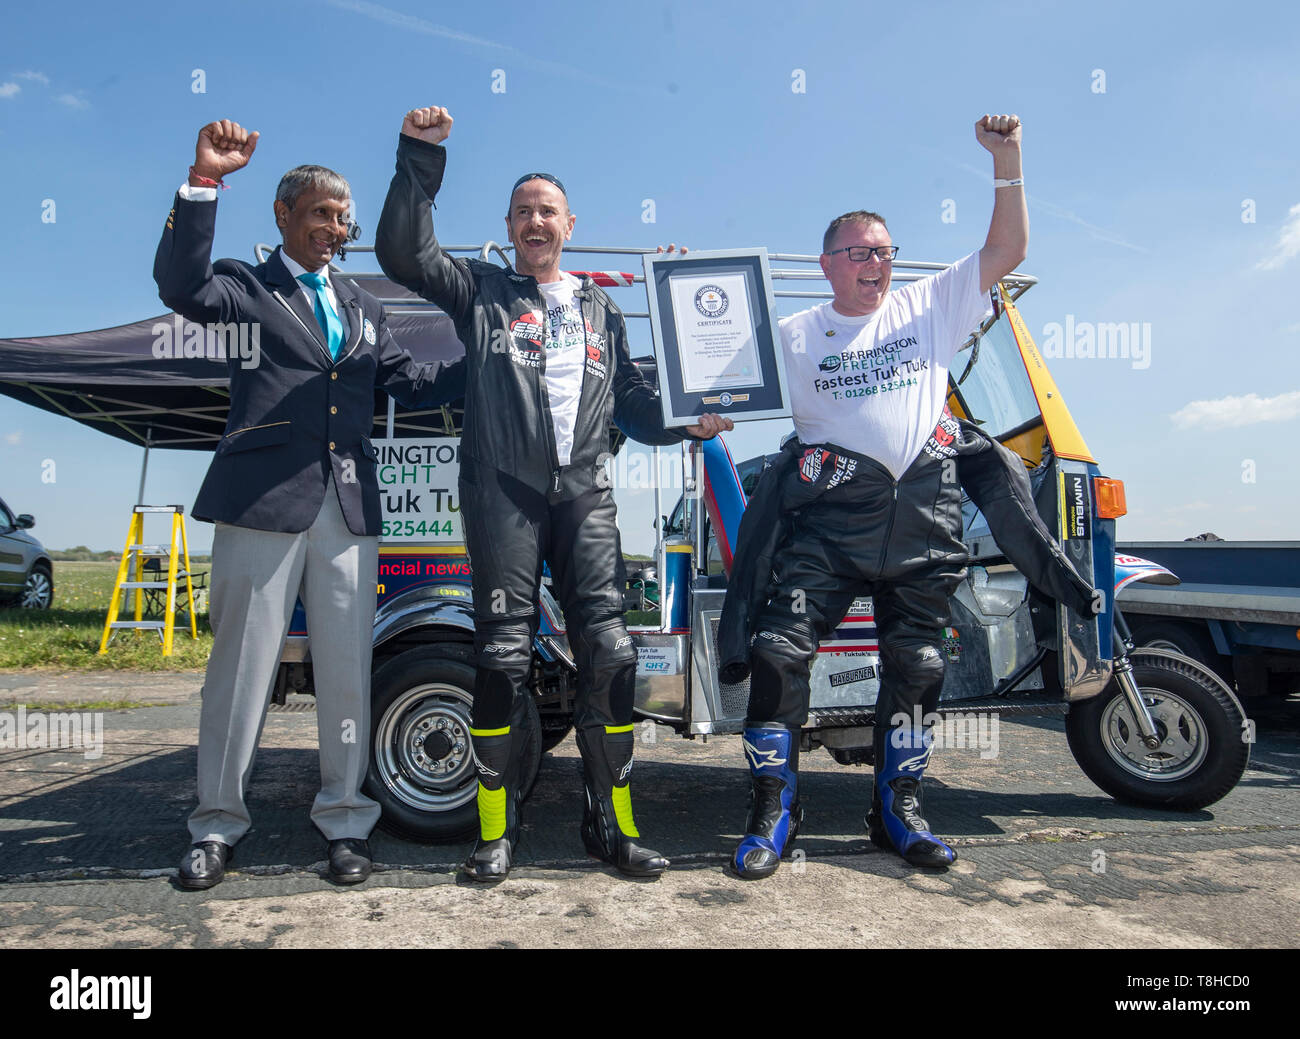 Essex businessman Matt Everard (right) and passenger Russell Shearman with Guinness World Records adjudicator Pravin Patel (left) as they celebrate their Guinness World Record after setting the world land speed record in a tuk tuk at Elvington Airfield in Yorkshire. Stock Photo